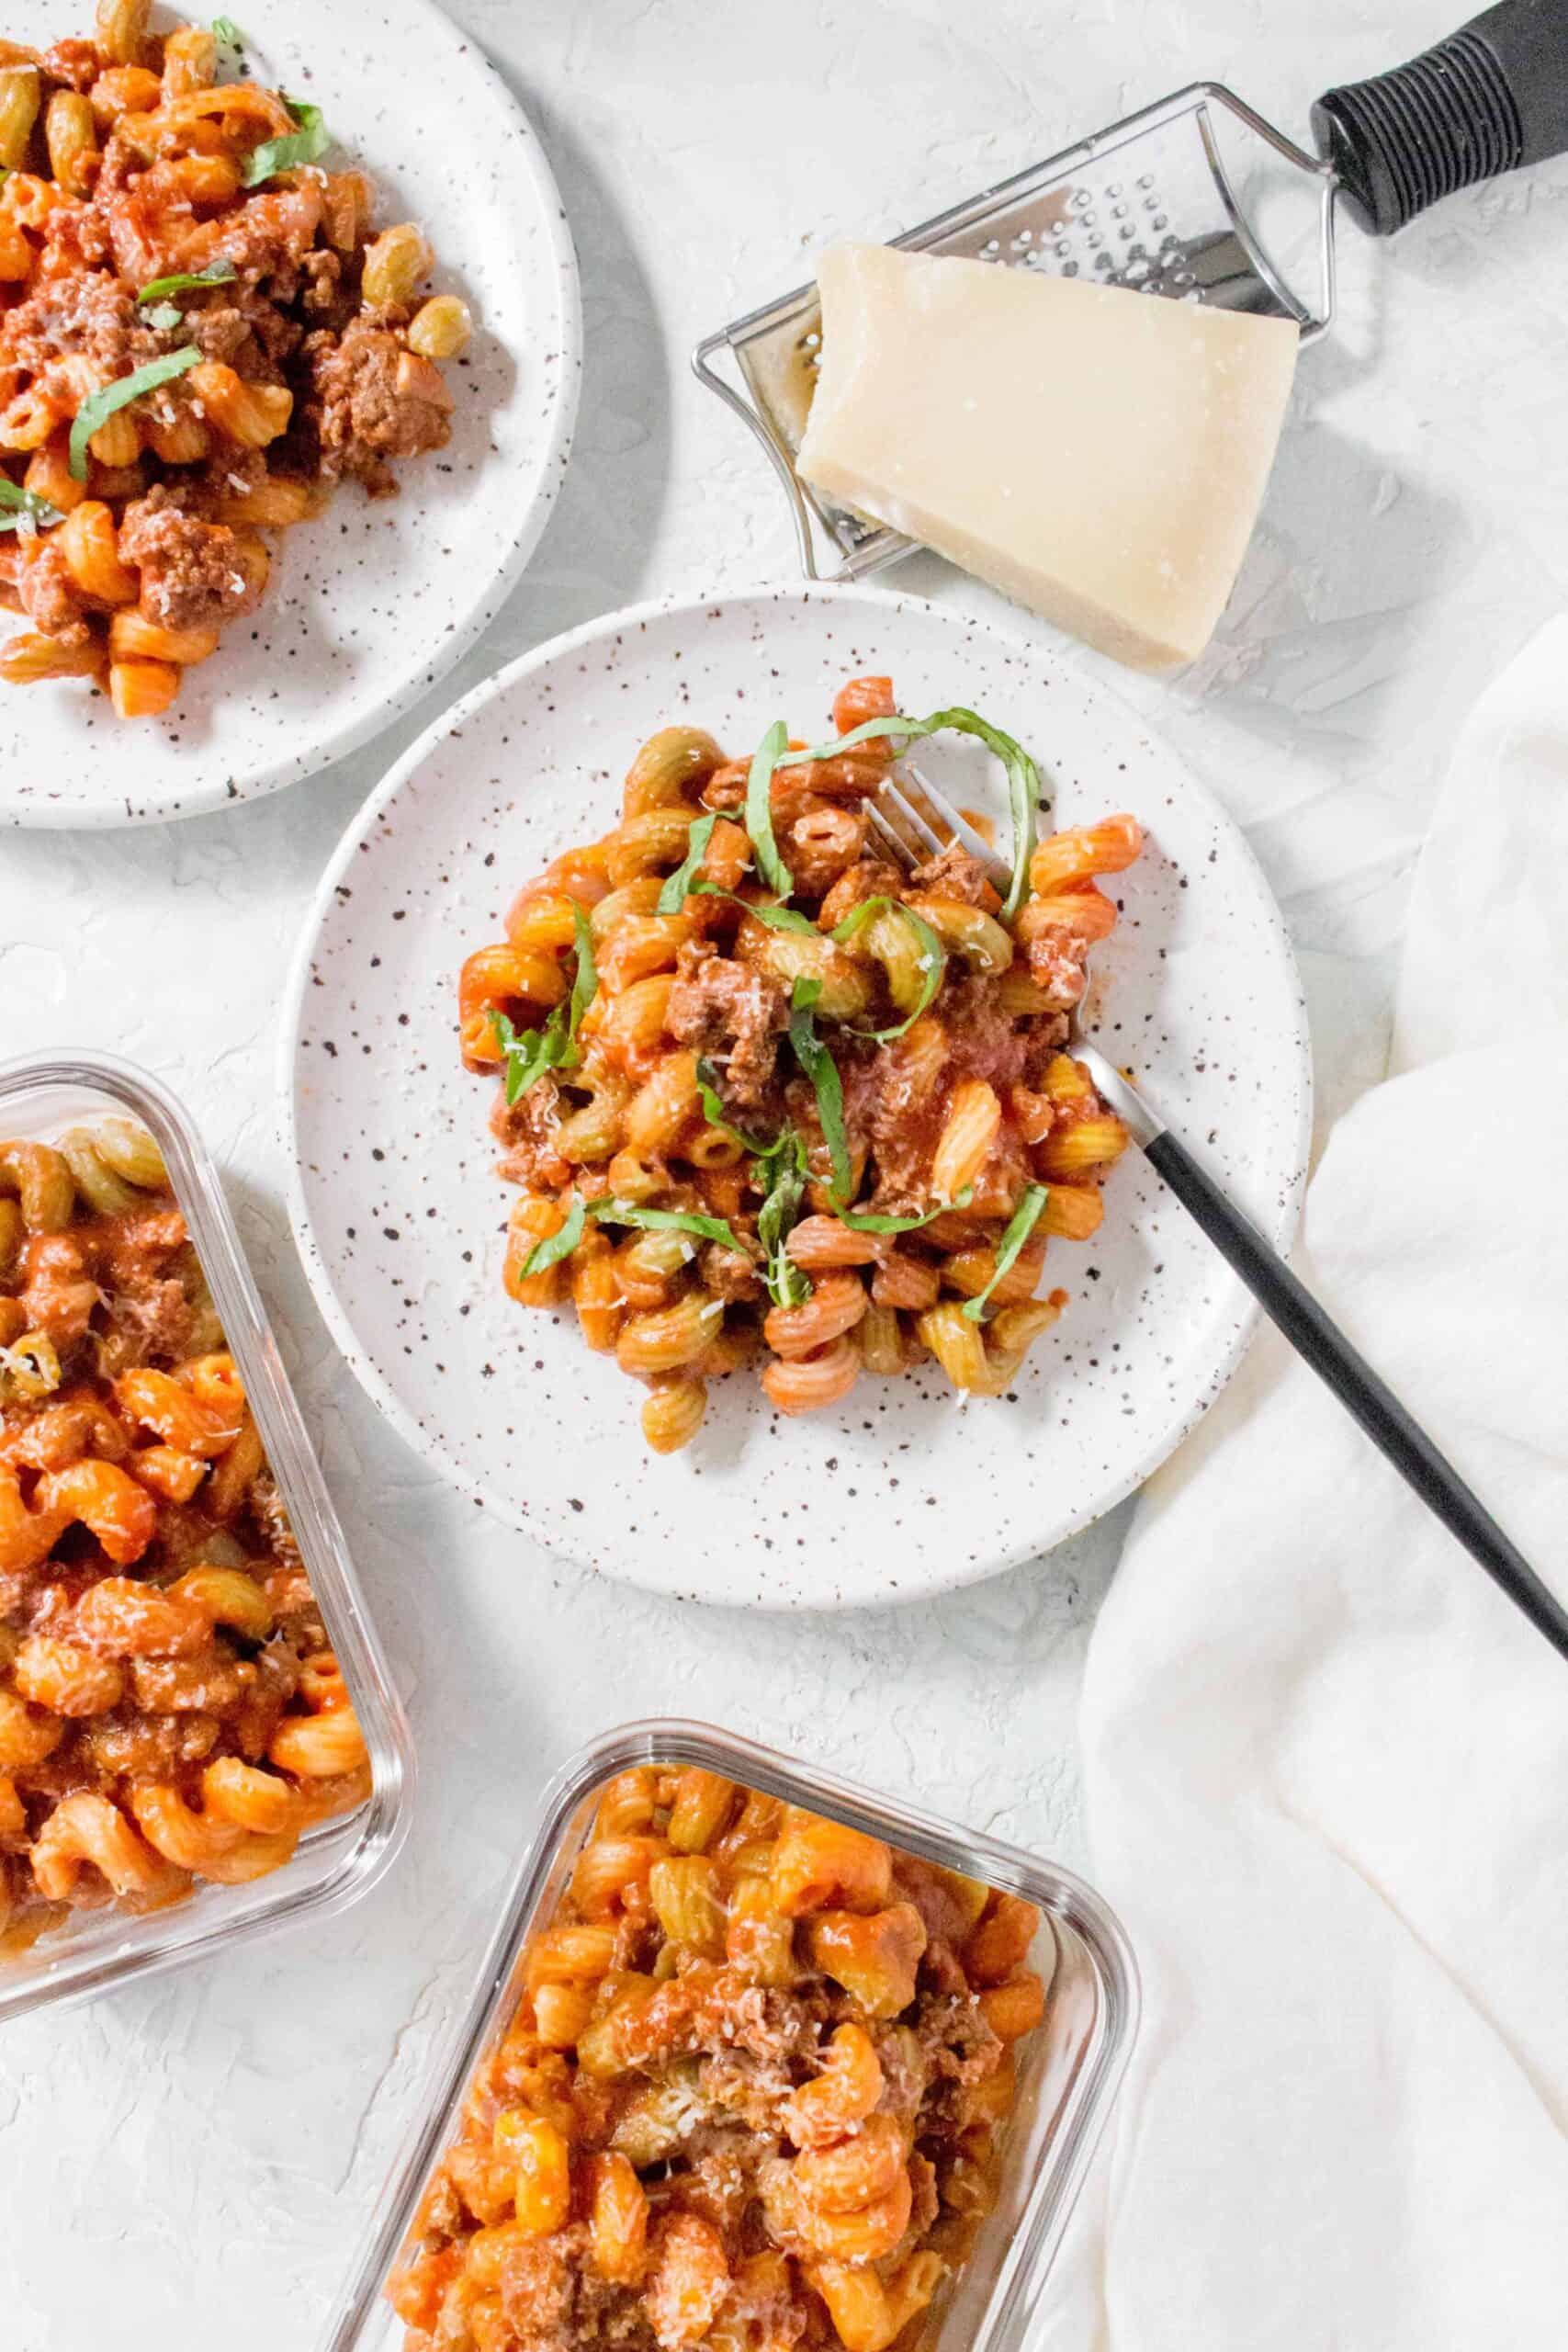 Wholesome, comforting, and delicious, this Instant Pot Beef and Pasta inspired by Beefaroni is going hit the spot!